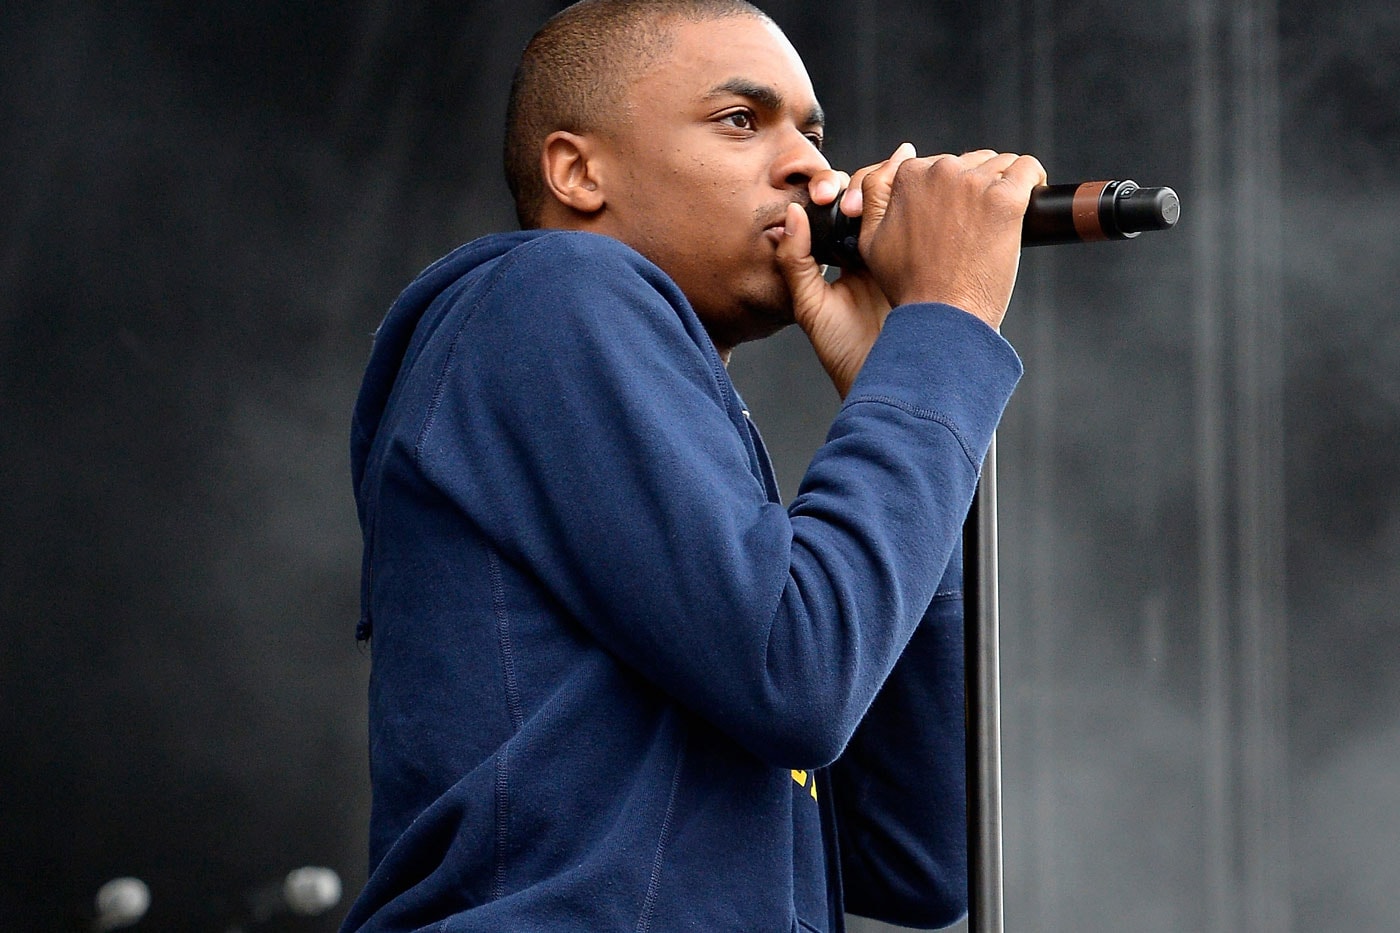 A Mother Gives Emotional Rant on Vince Staples' "Norf Norf"